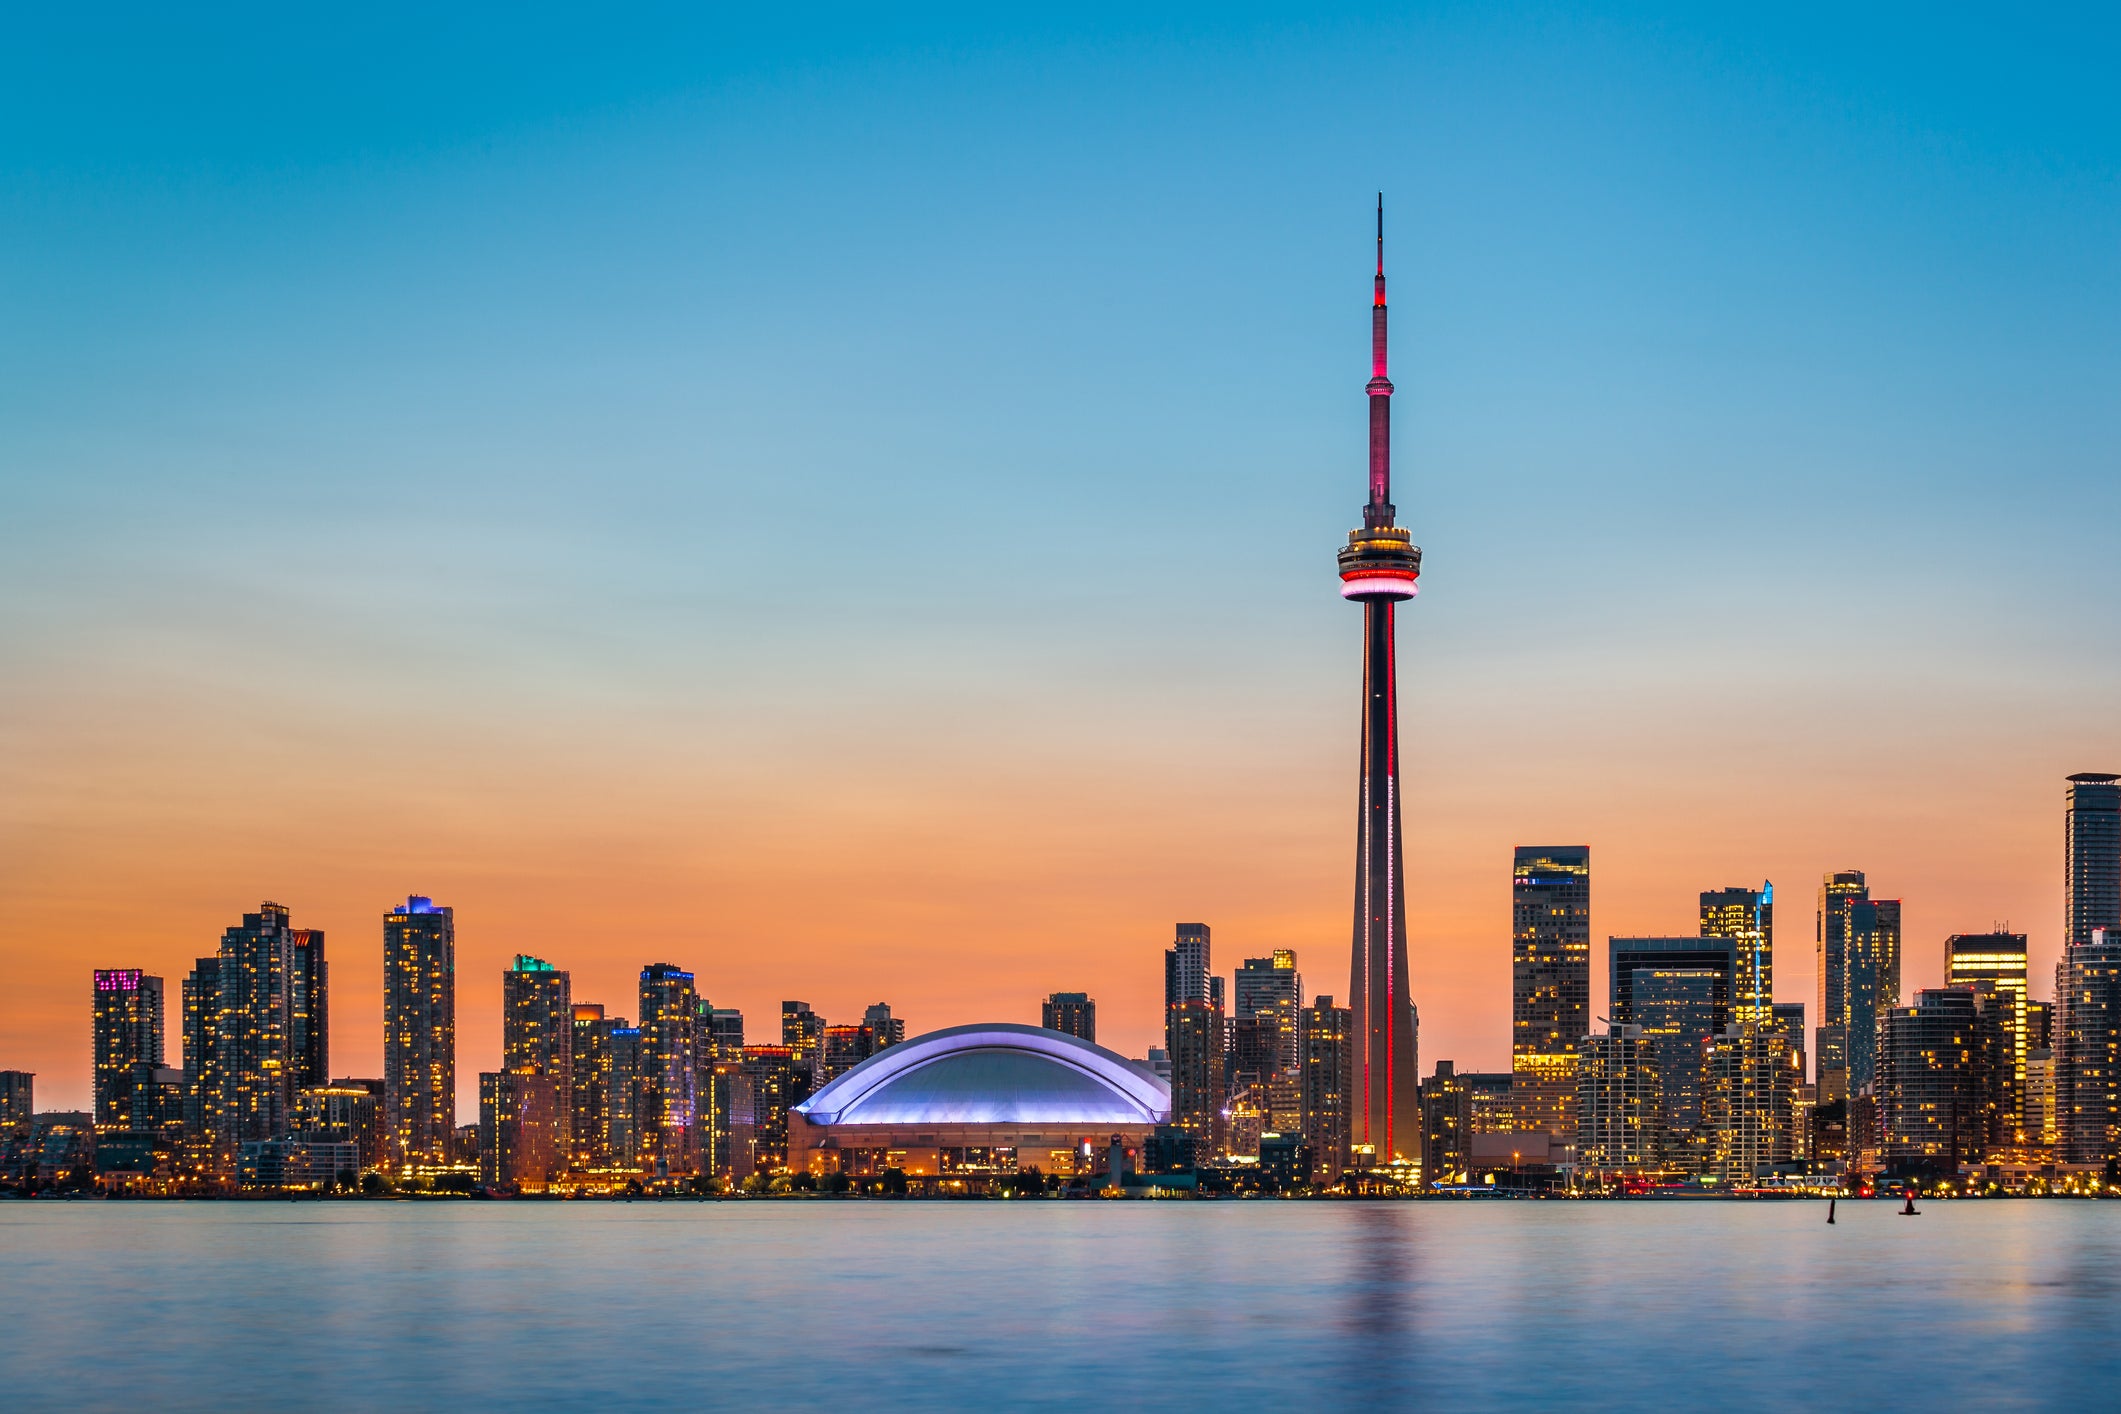 The iconic skyline and inspiring culture scene are just two contributing factors to Toronto’s excellent global reputation